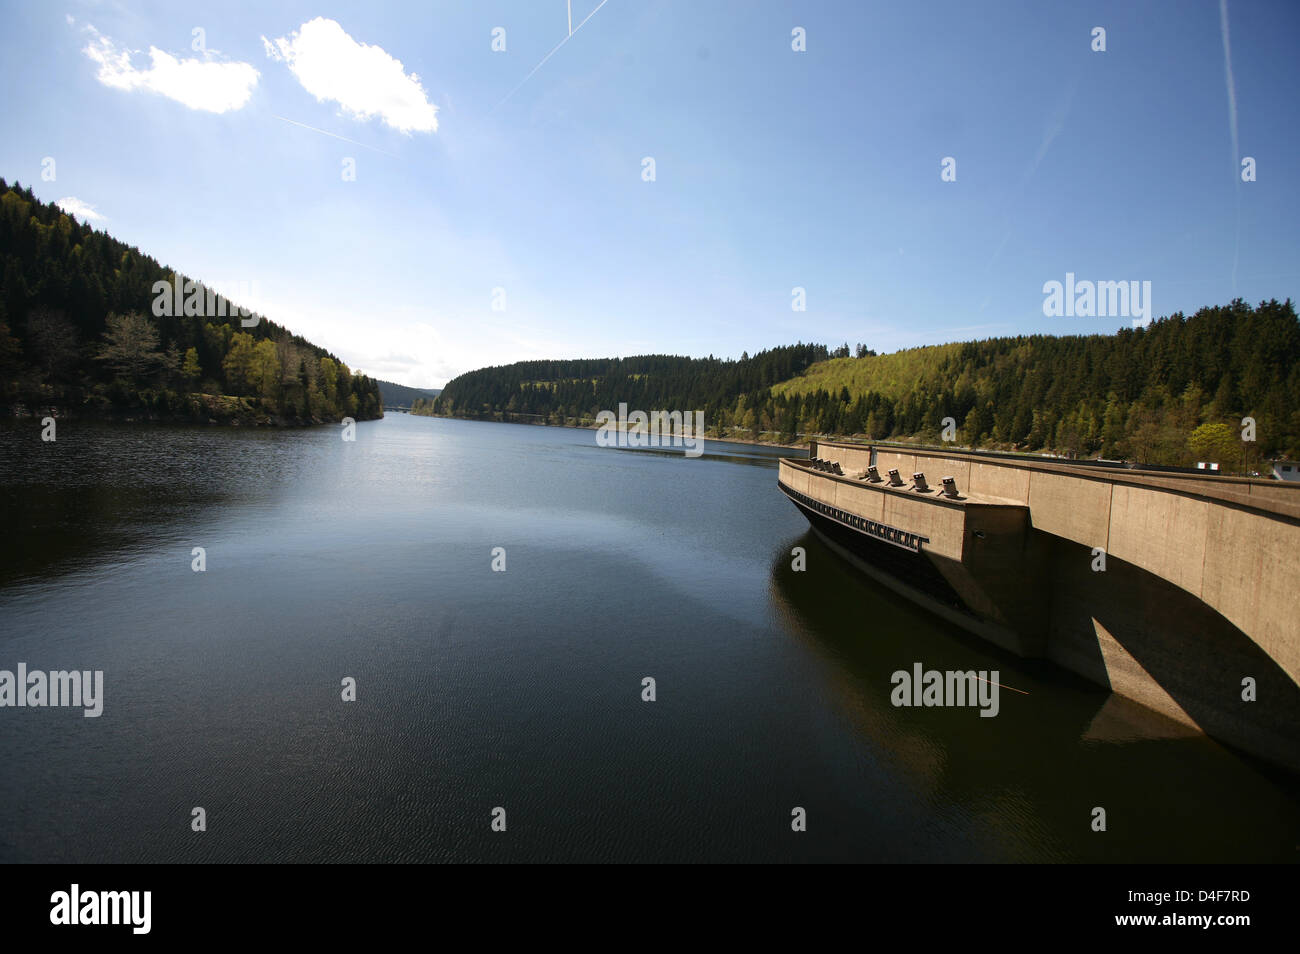 'Okertal' reservoir in the Harz Mountains near Osterode, Germany, 6 May 2008. Photo: Frank May Stock Photo